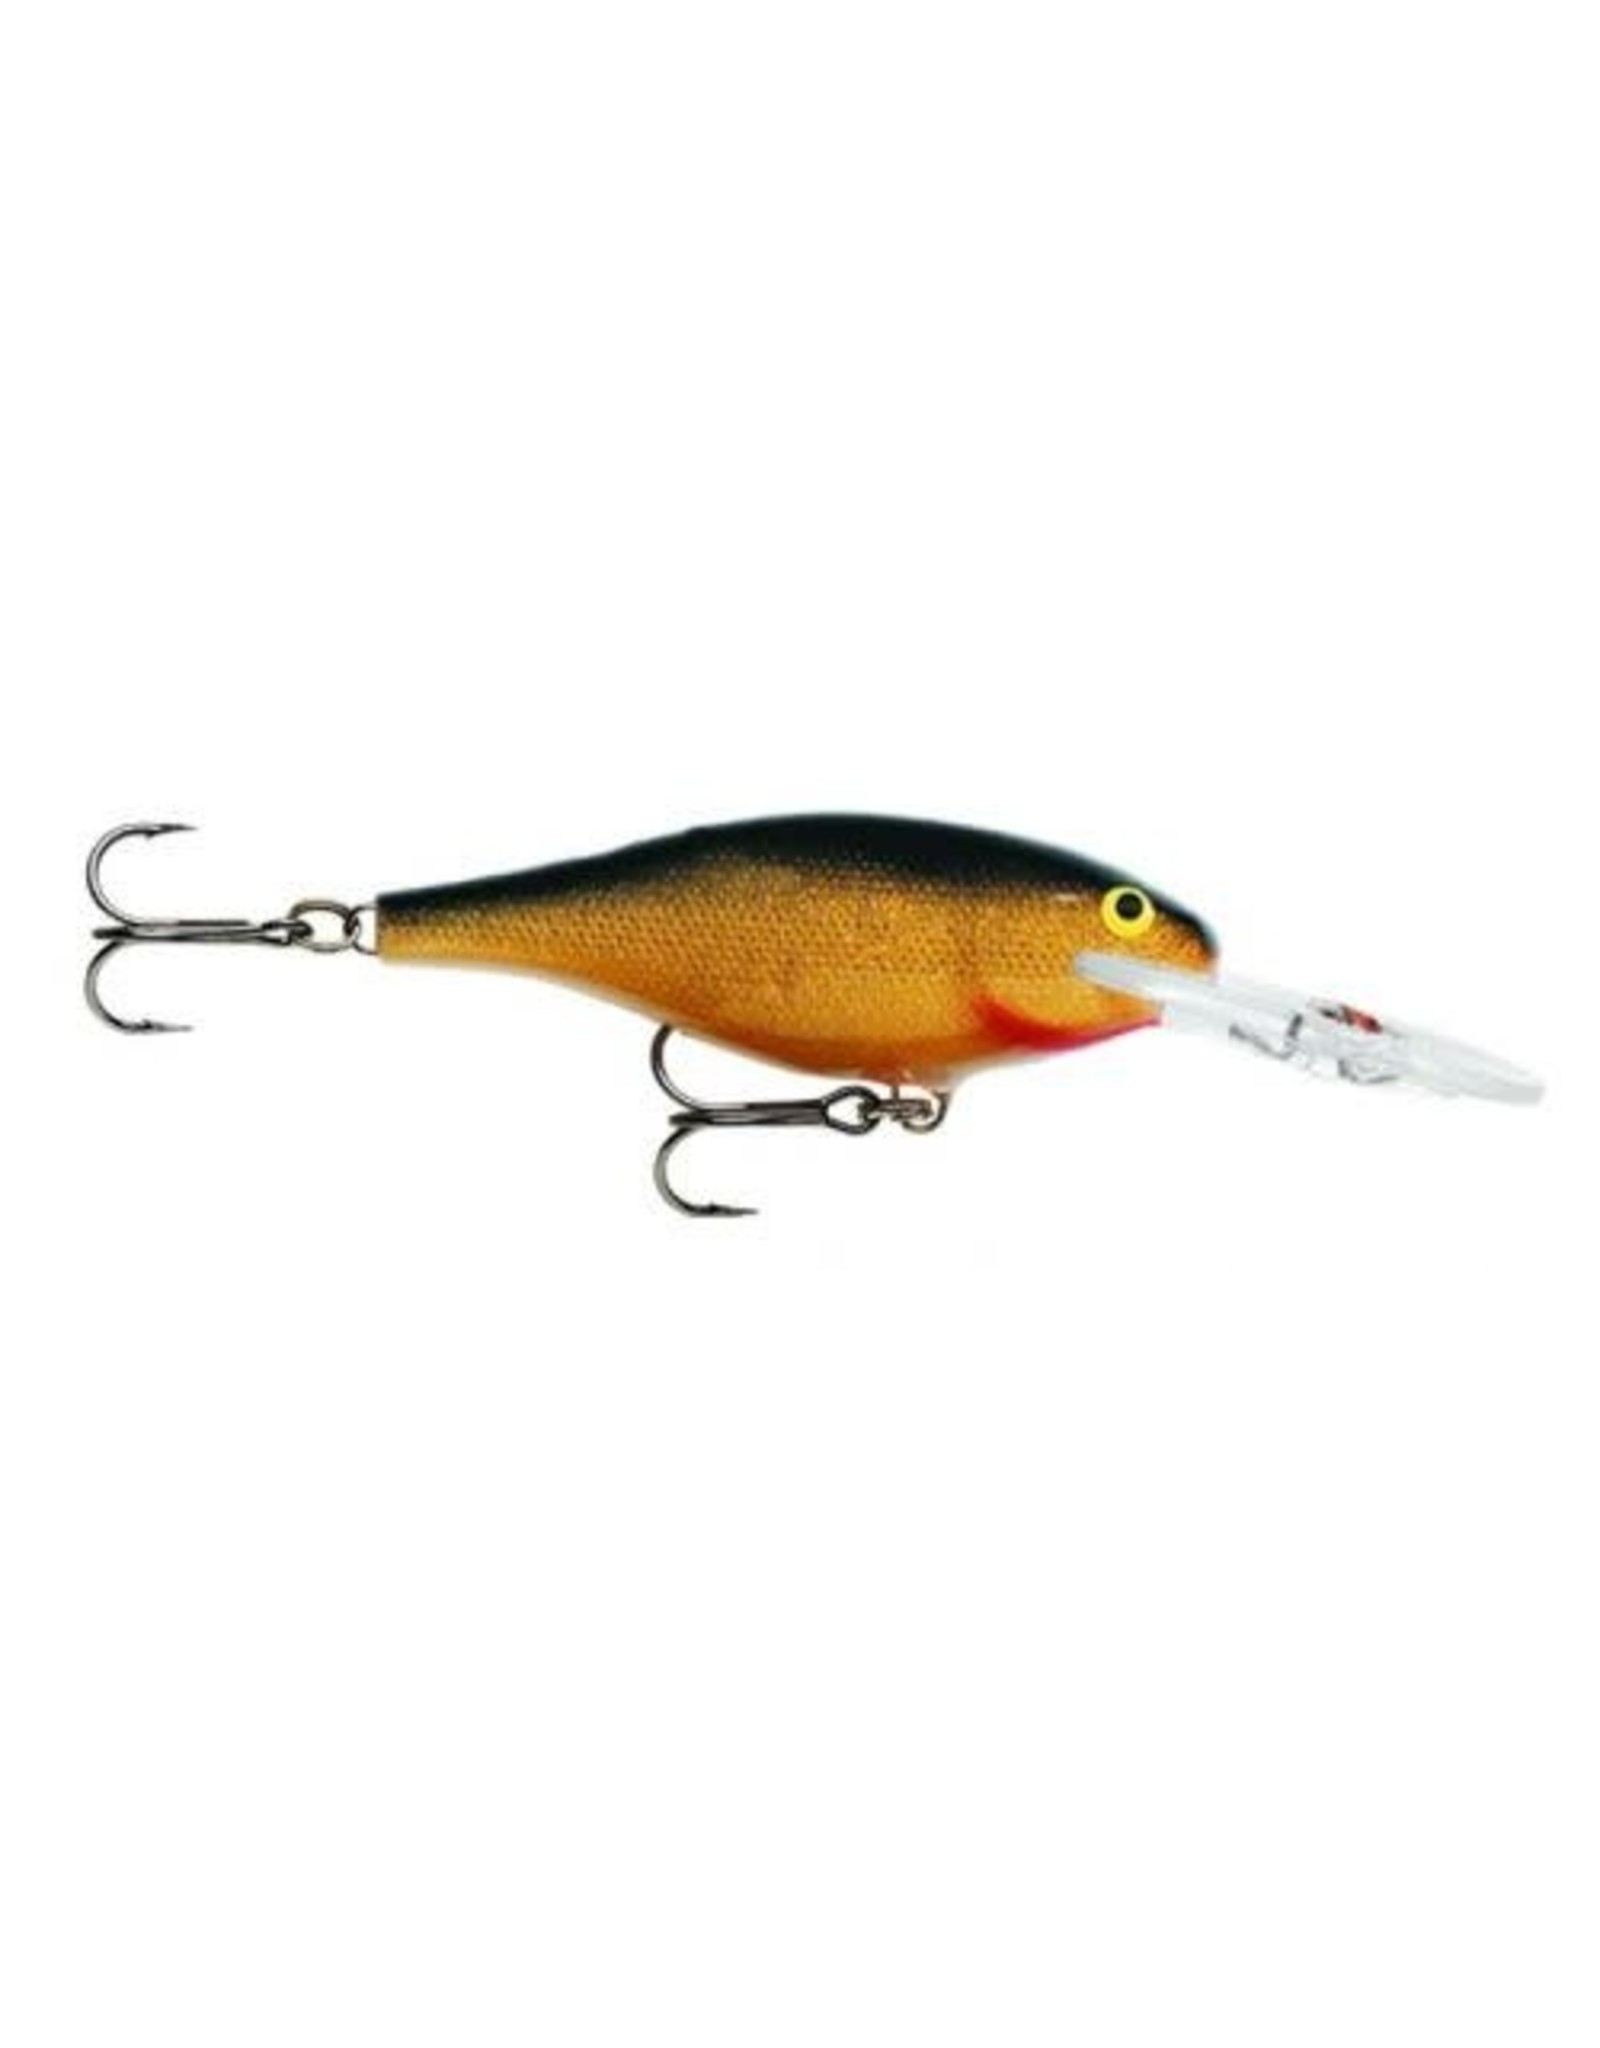 Rapala Rapala Shad Rap 5/16 Oz. - Gold and Black - Larry's Sporting Goods